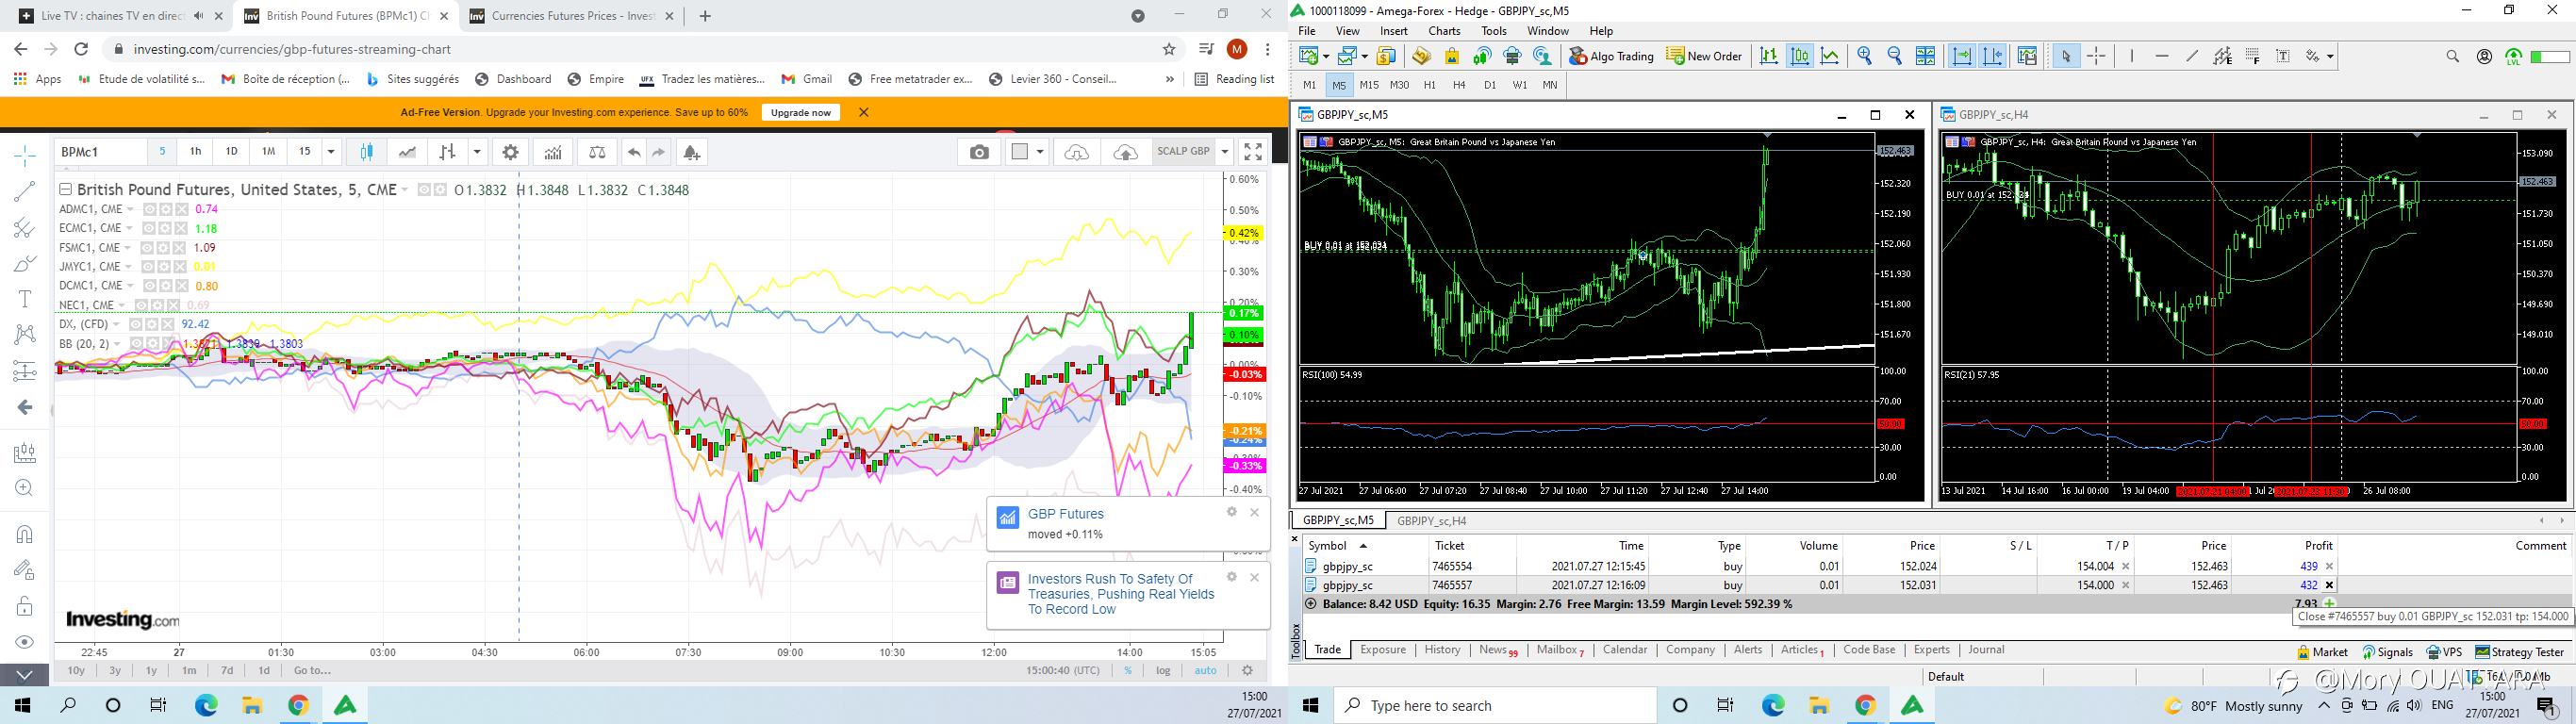 TODAY MY BEST TRADE IN DOUBLE SCREEN VIEW